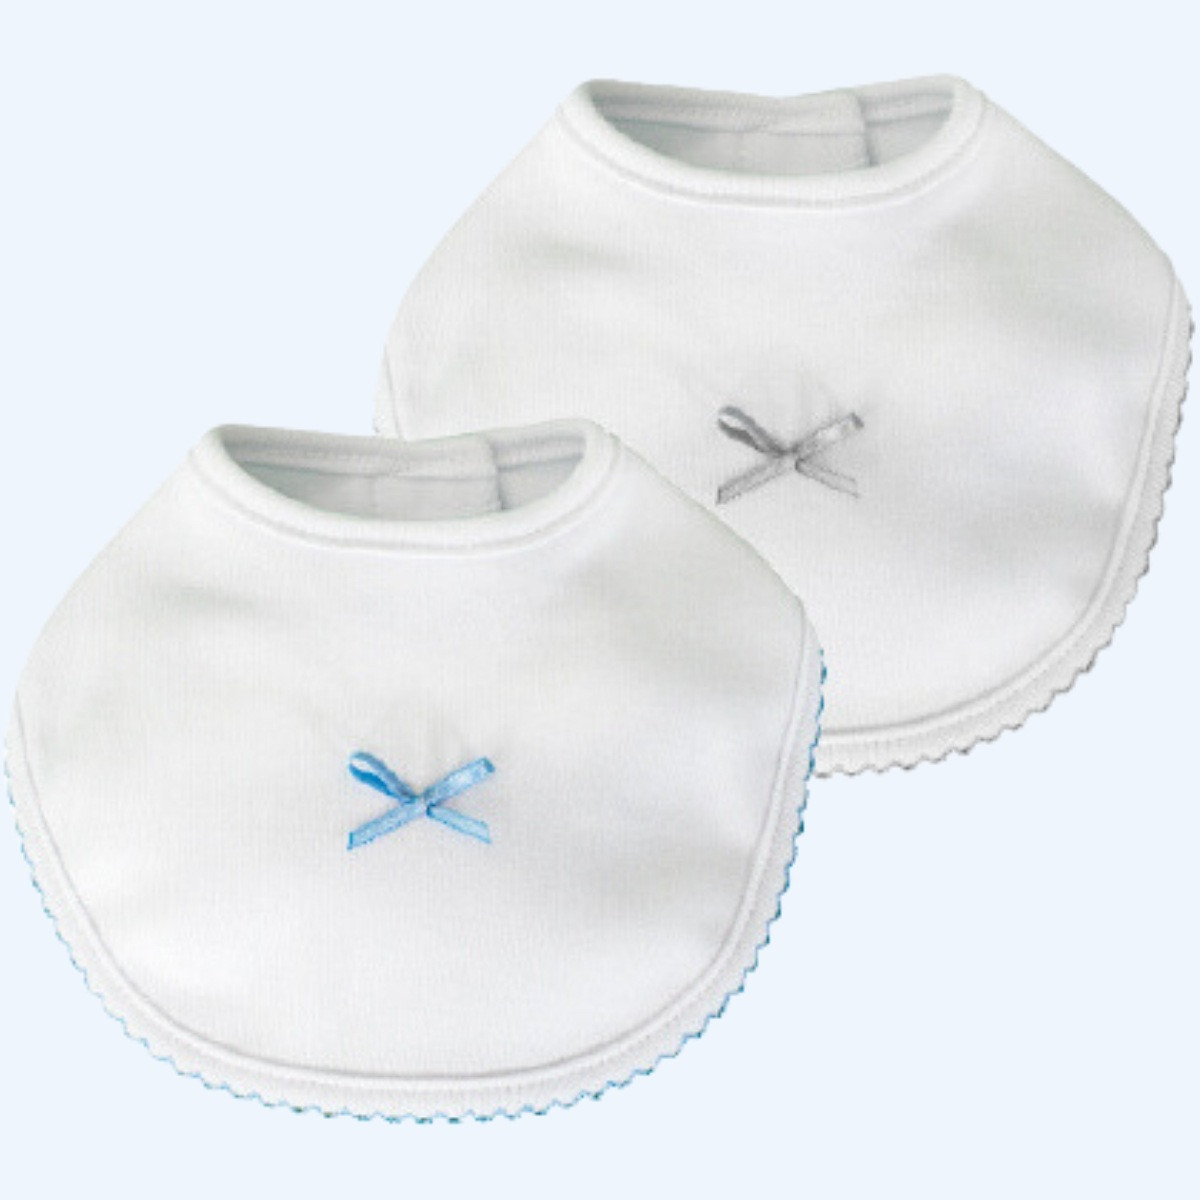 BABY SET OF TWO BIBS WITH TINY BOW CALAMARO - 1